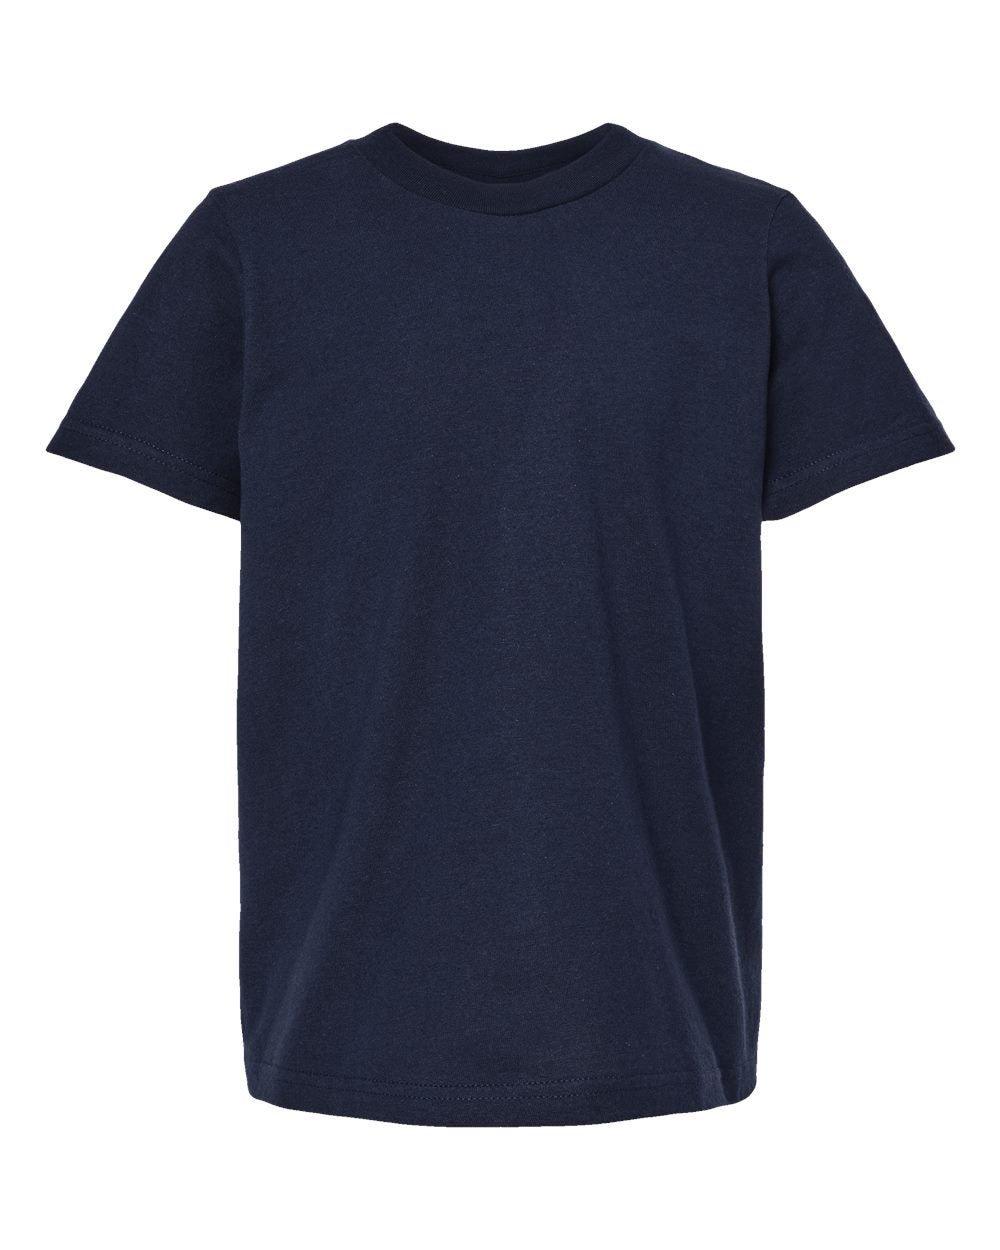 Tultex Youth Tee (235) in Navy